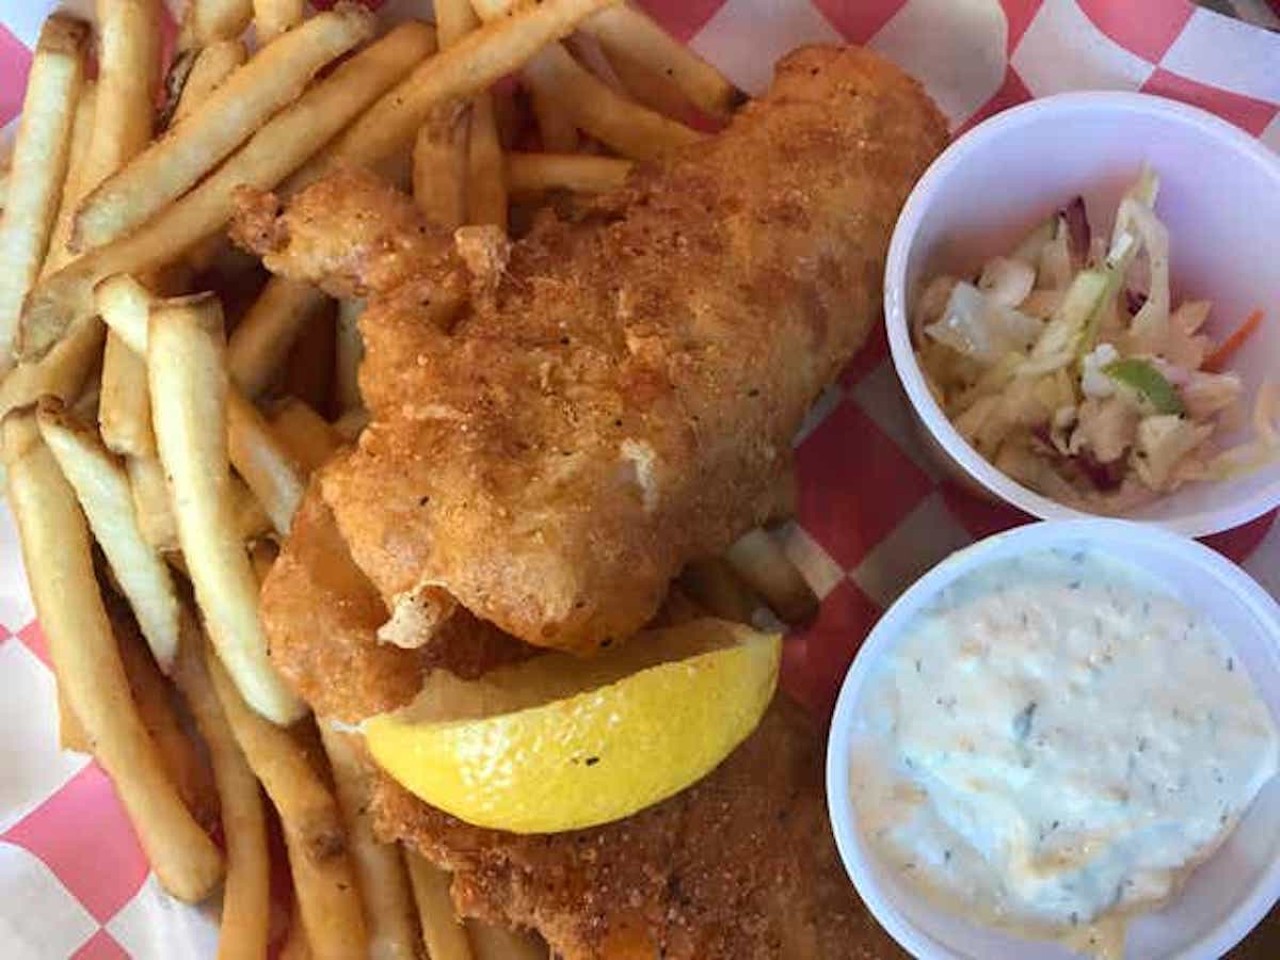 St. Cecilia
3105 Madison Road, Oakley
St. Cecilia in Oakley will host its annual fish fry on Friday, March 1 from 5-7:30 p.m.